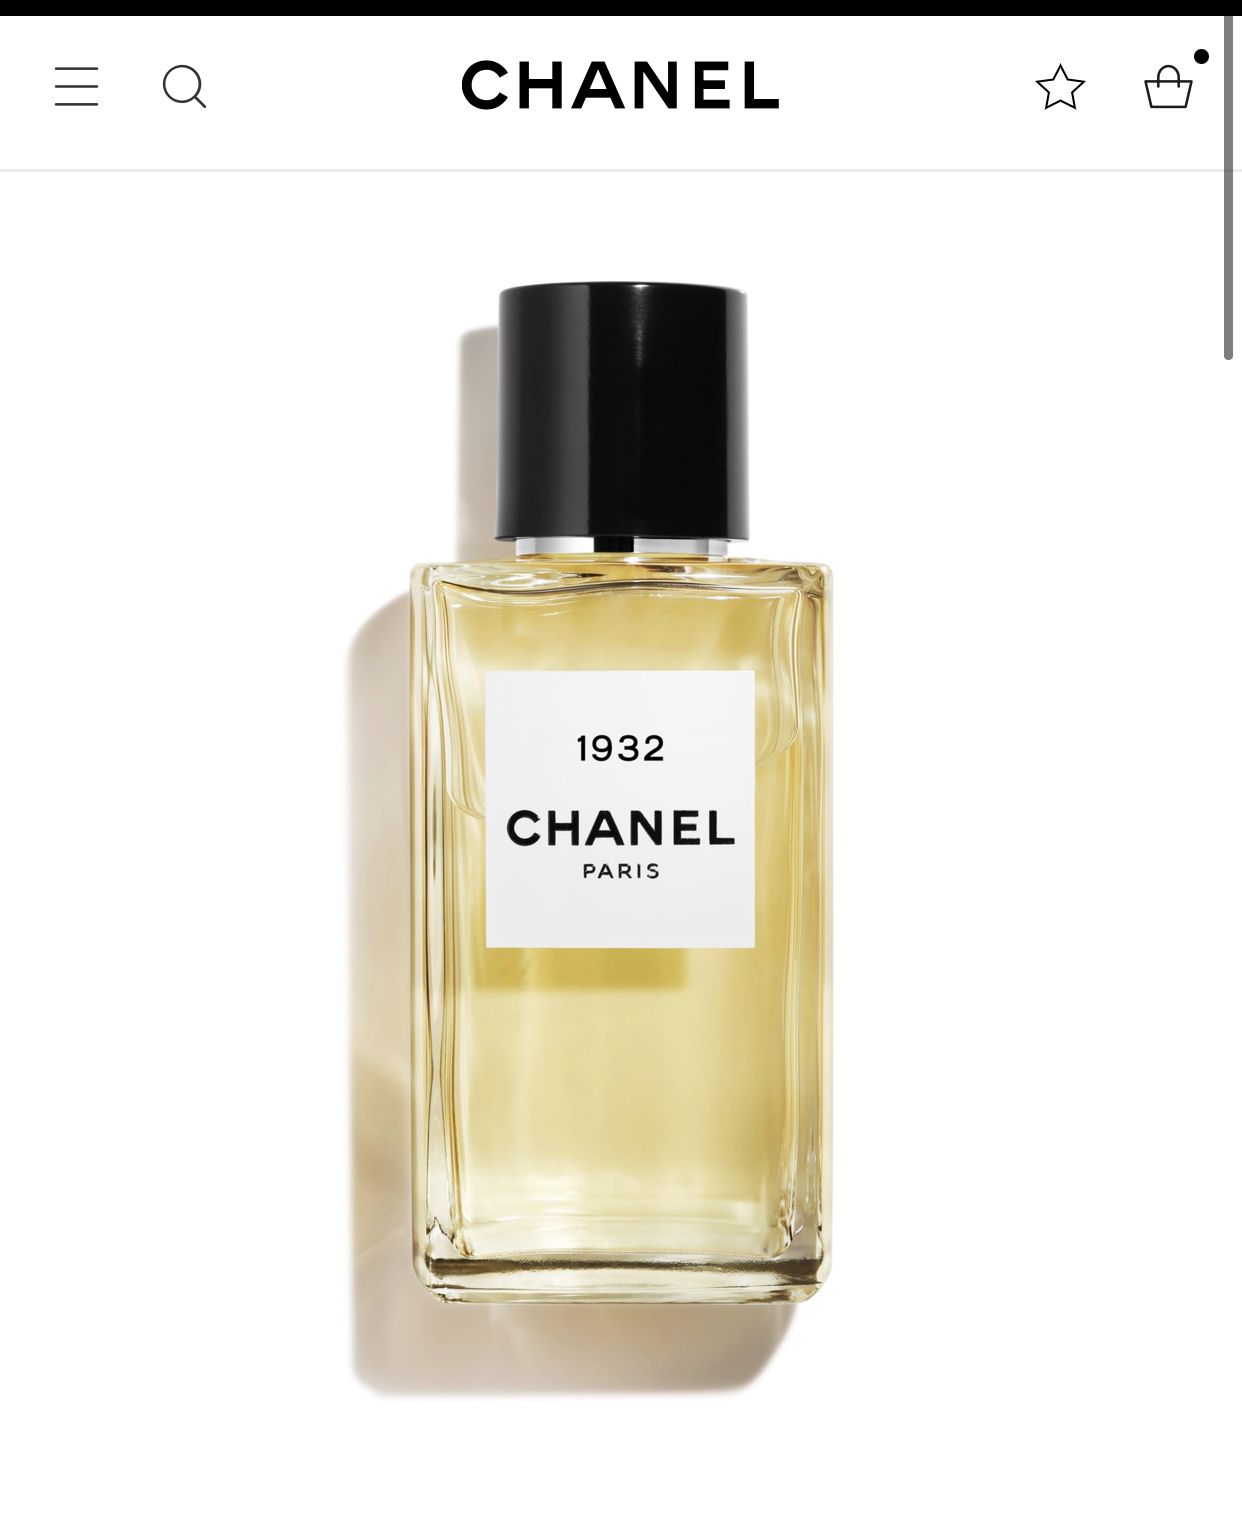 Chanel 1932 Brand new Perfume with receipt